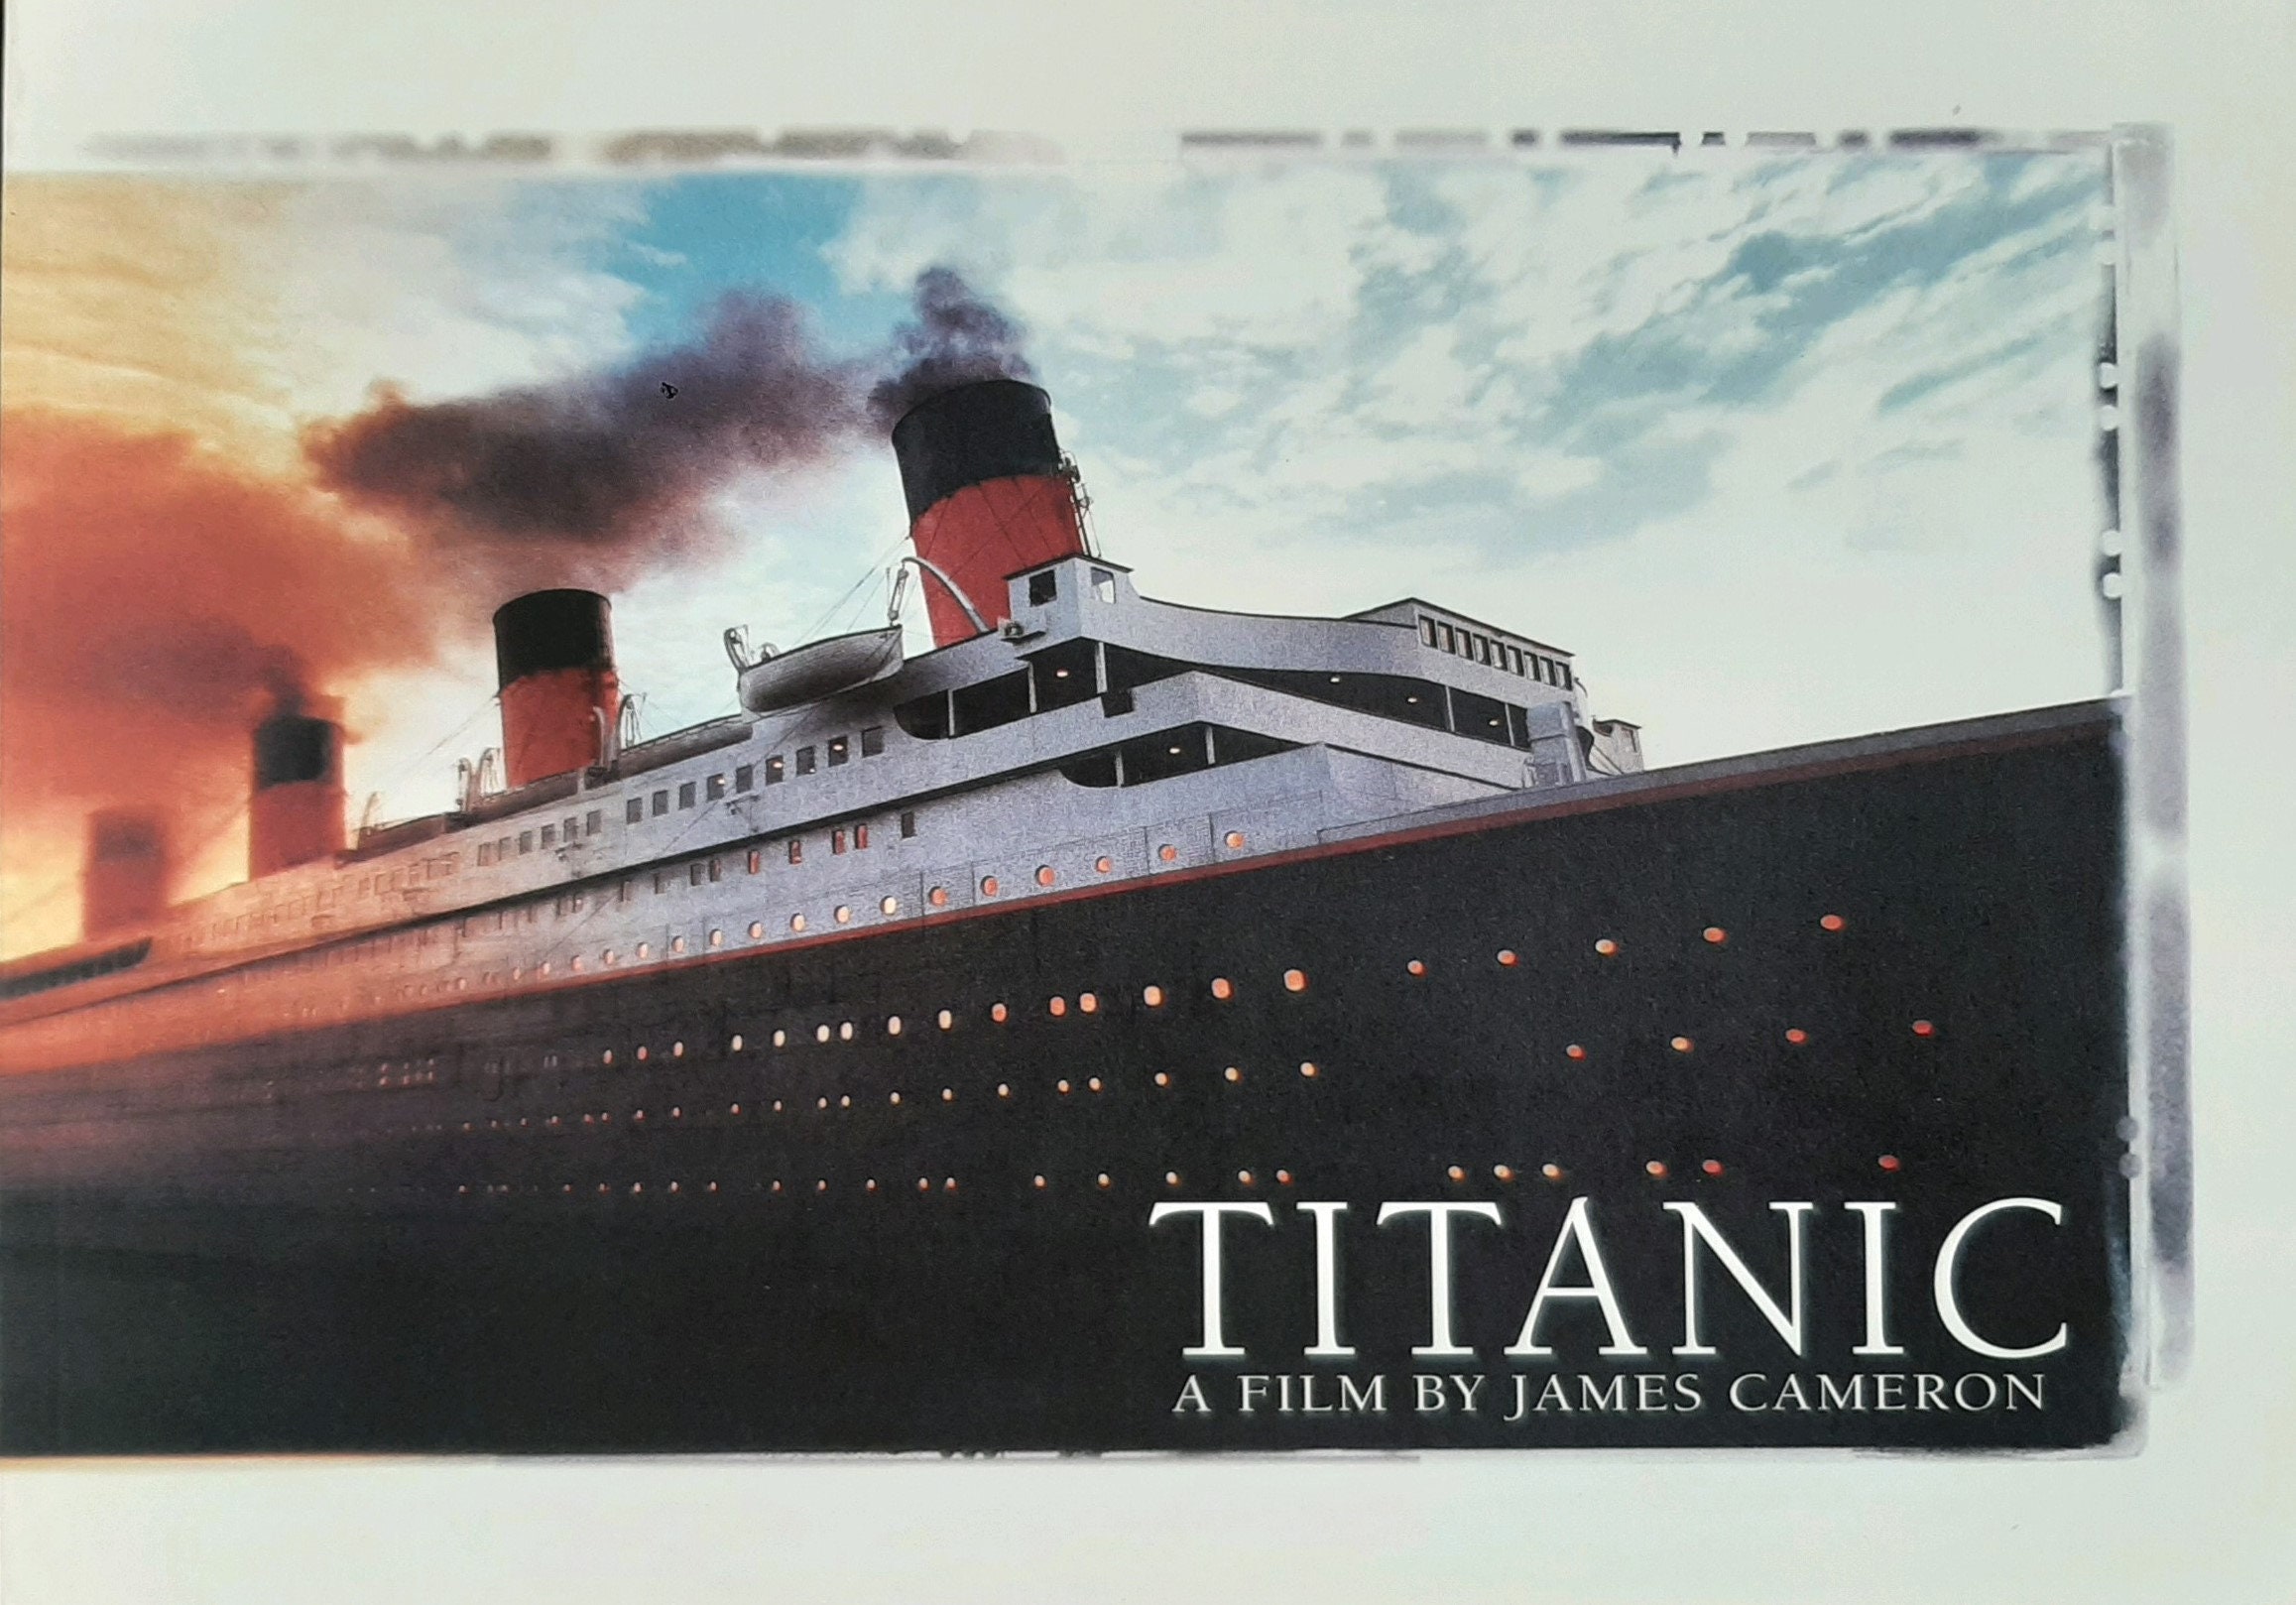 Titanic Collectors Edition VHS Gift Set Film Strip Photo Book - Etsy Canada